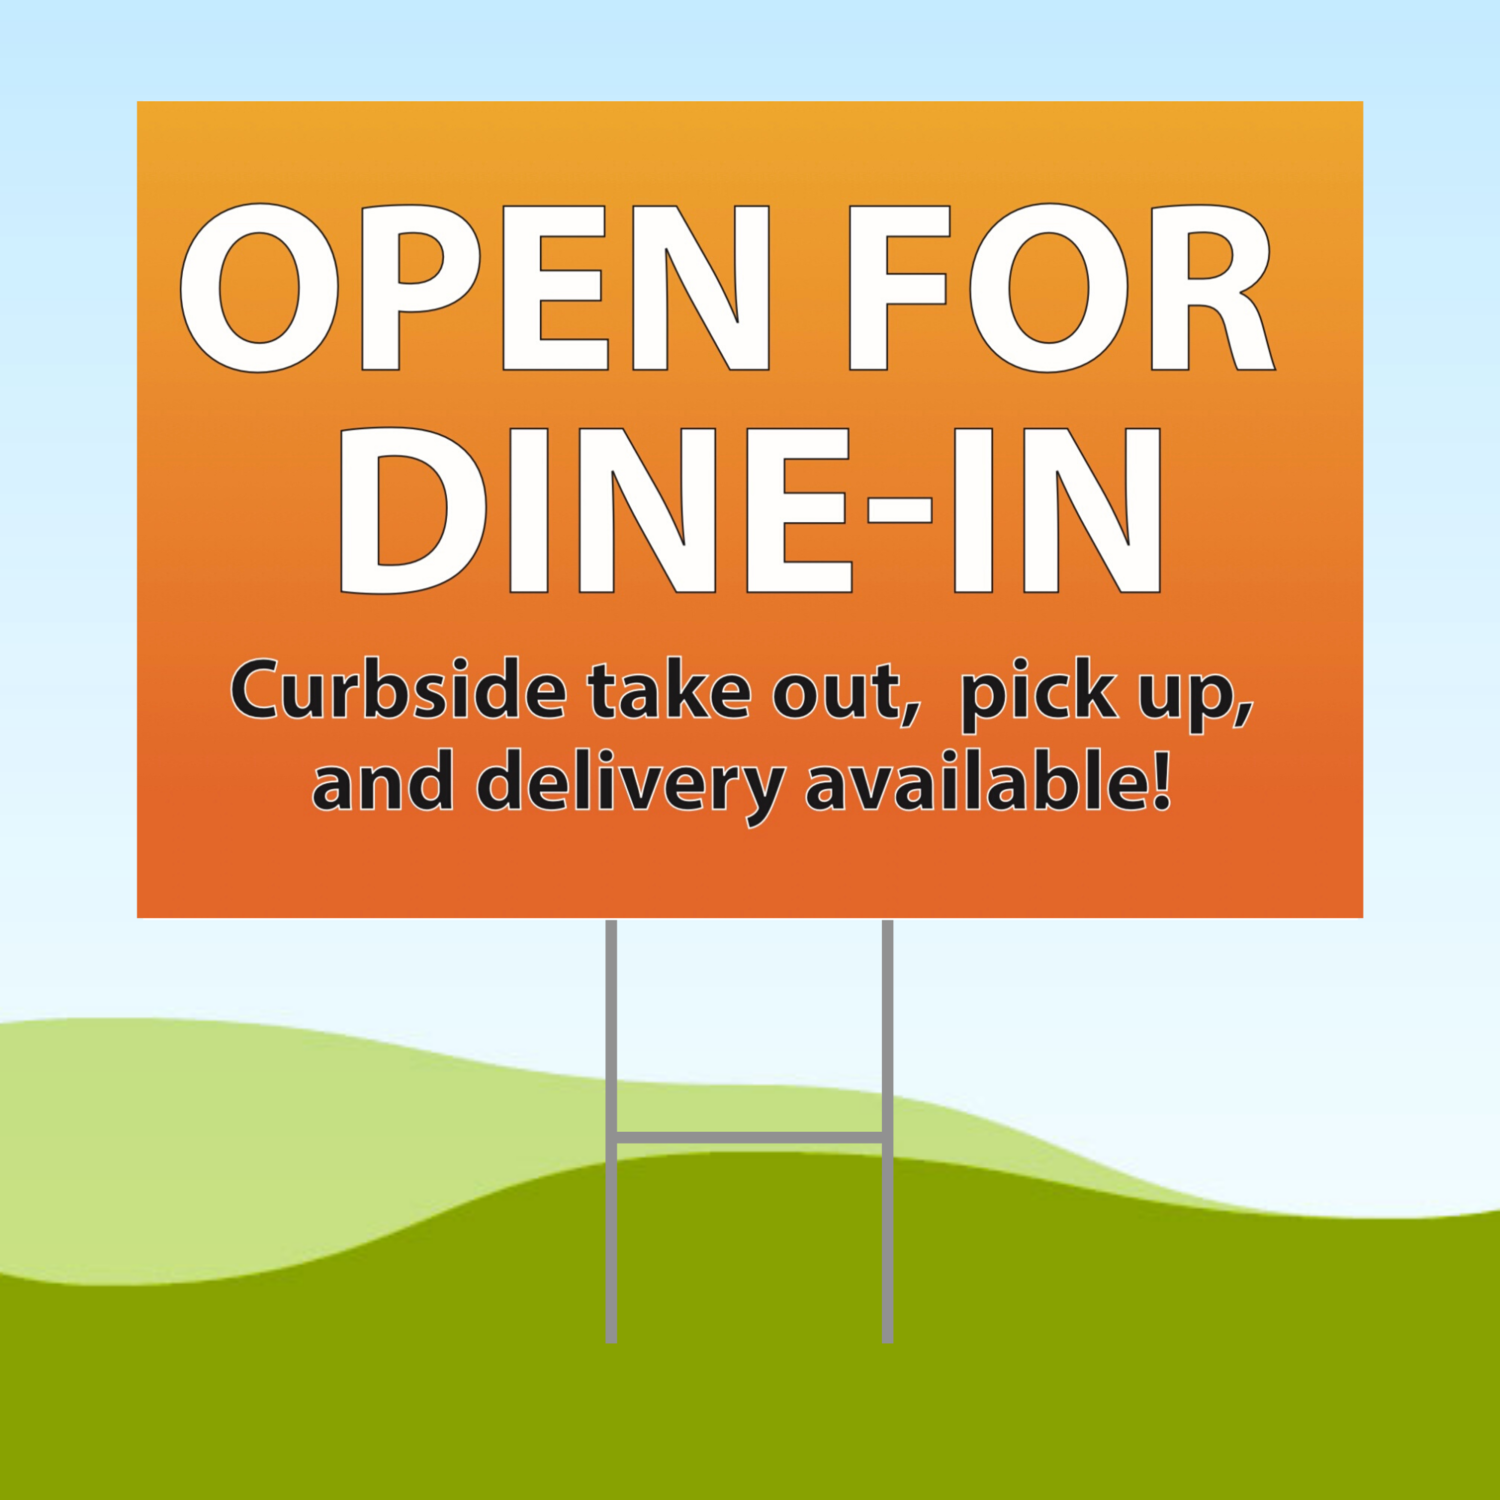 Open For Dine-In 18x24 Yard Sign WITH STAKE Corrugated Plastic Bandit